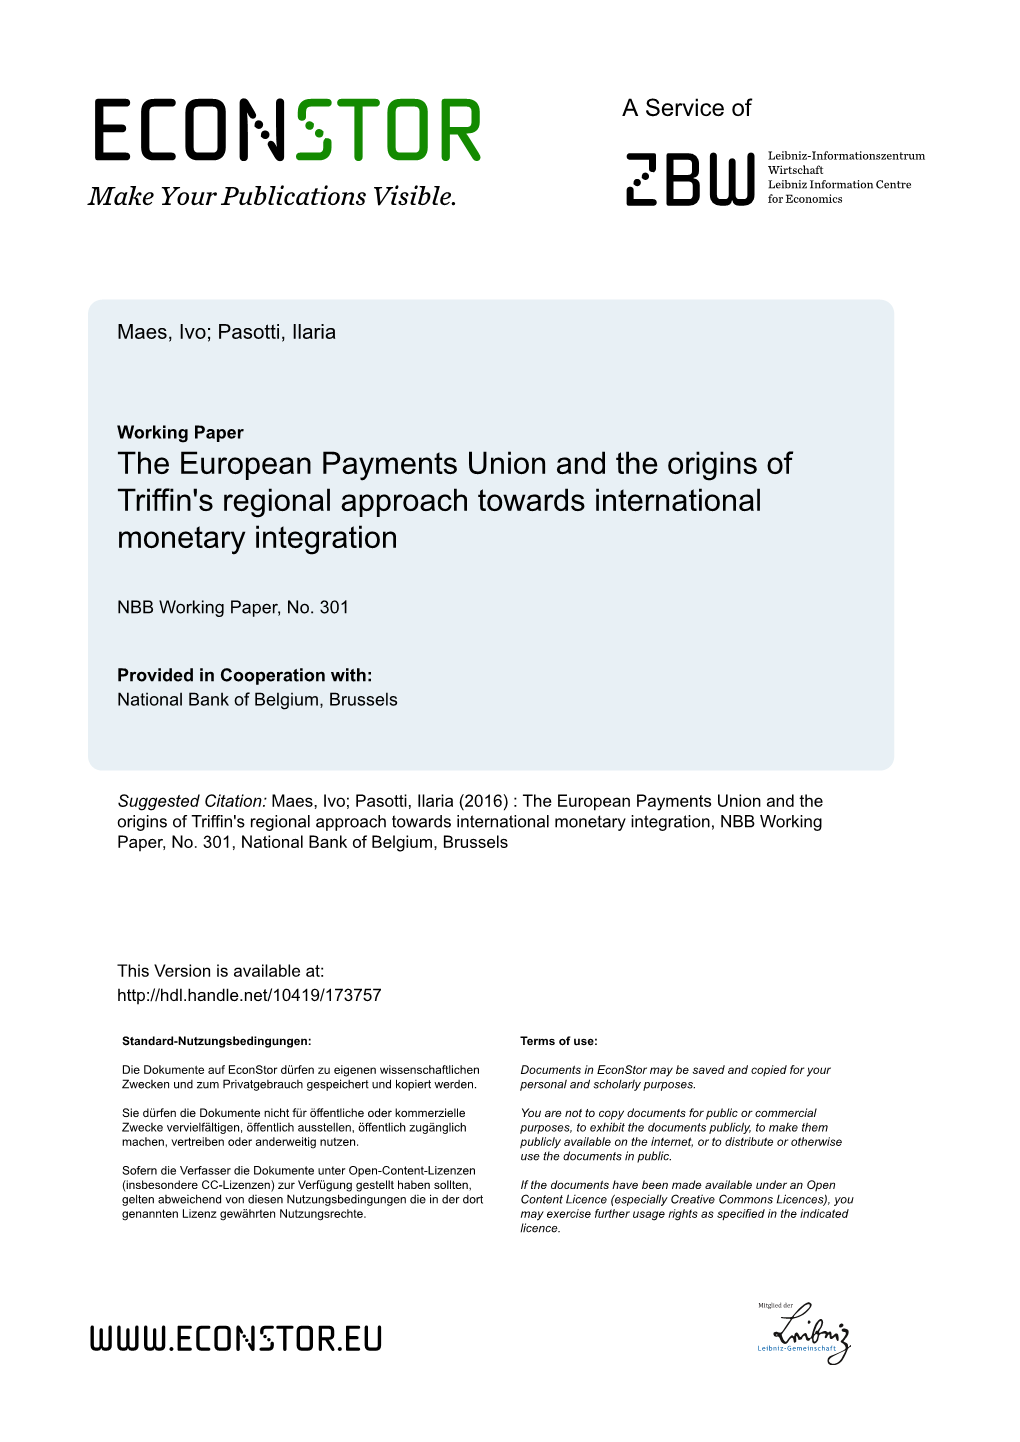 The European Payments Union and the Origins of Triffin's Regional Approach Towards International Monetary Integration